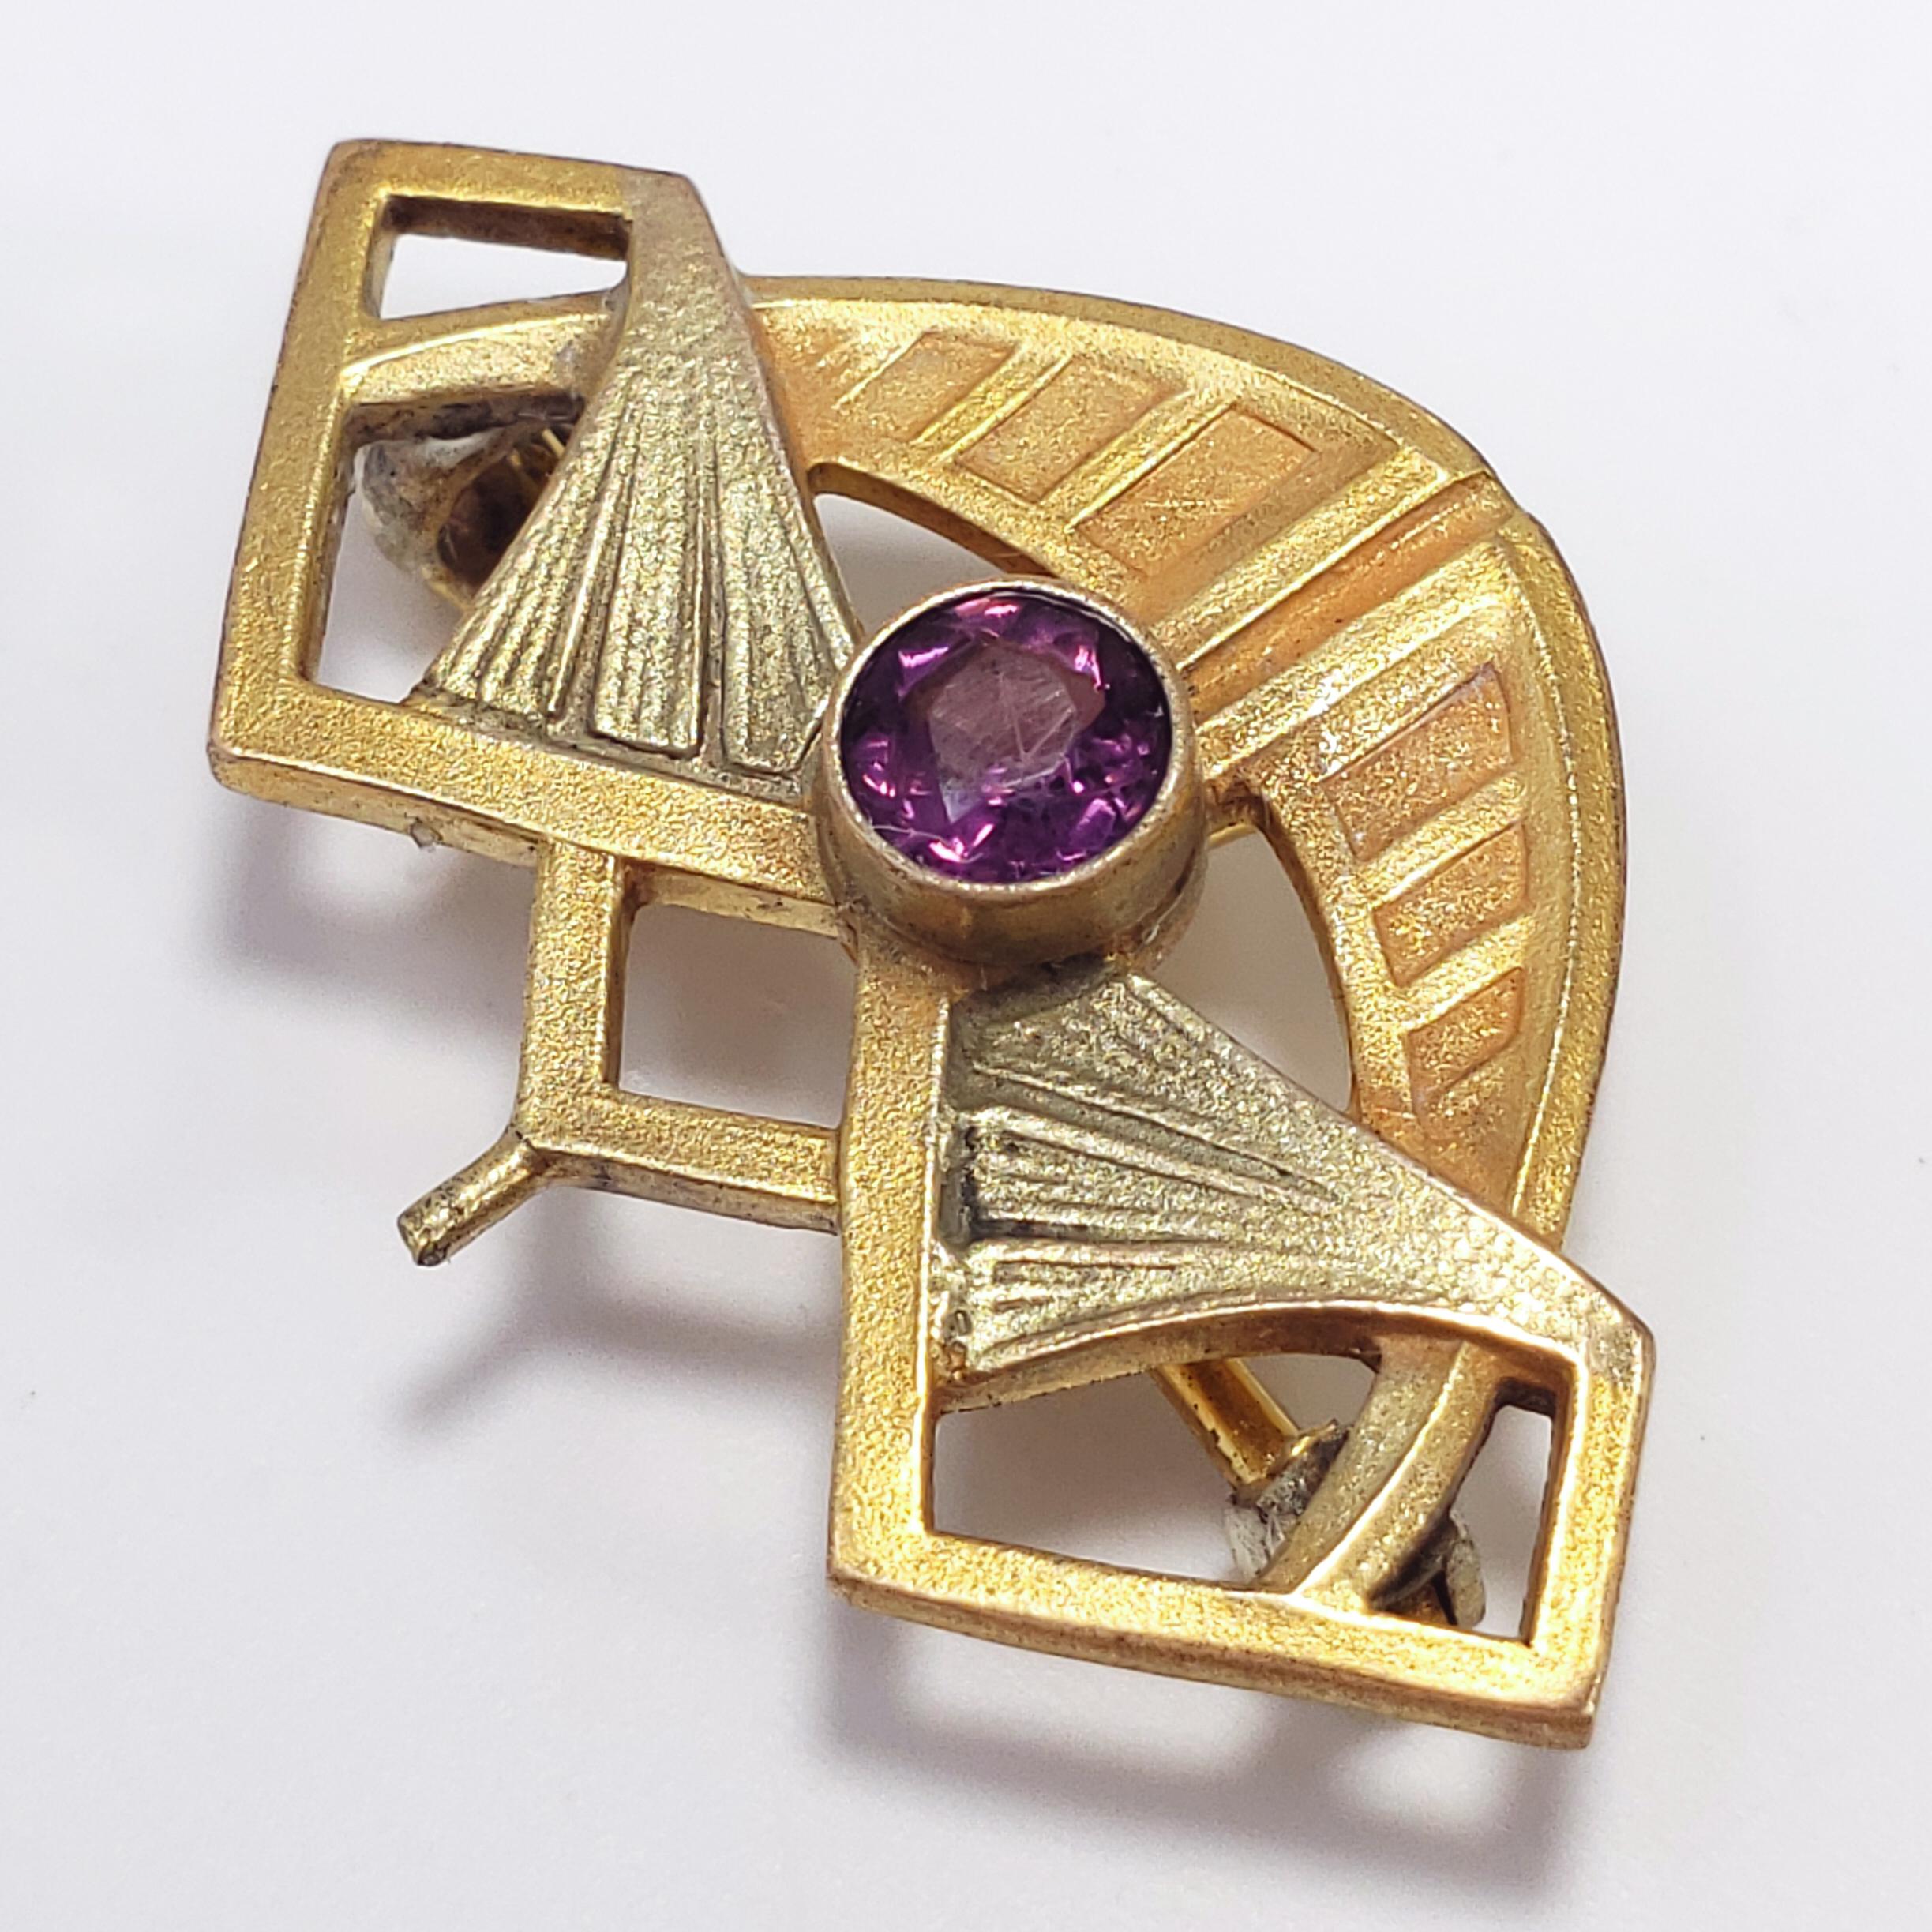 Bold art deco charm on a small accessory for the perfect balance of class and style! Features a single bezel set amethyst-colored crystal in a geometrical brass-tone setting. Can be worn as either a brooch/pin or necklace pendant.

Hallmarks: